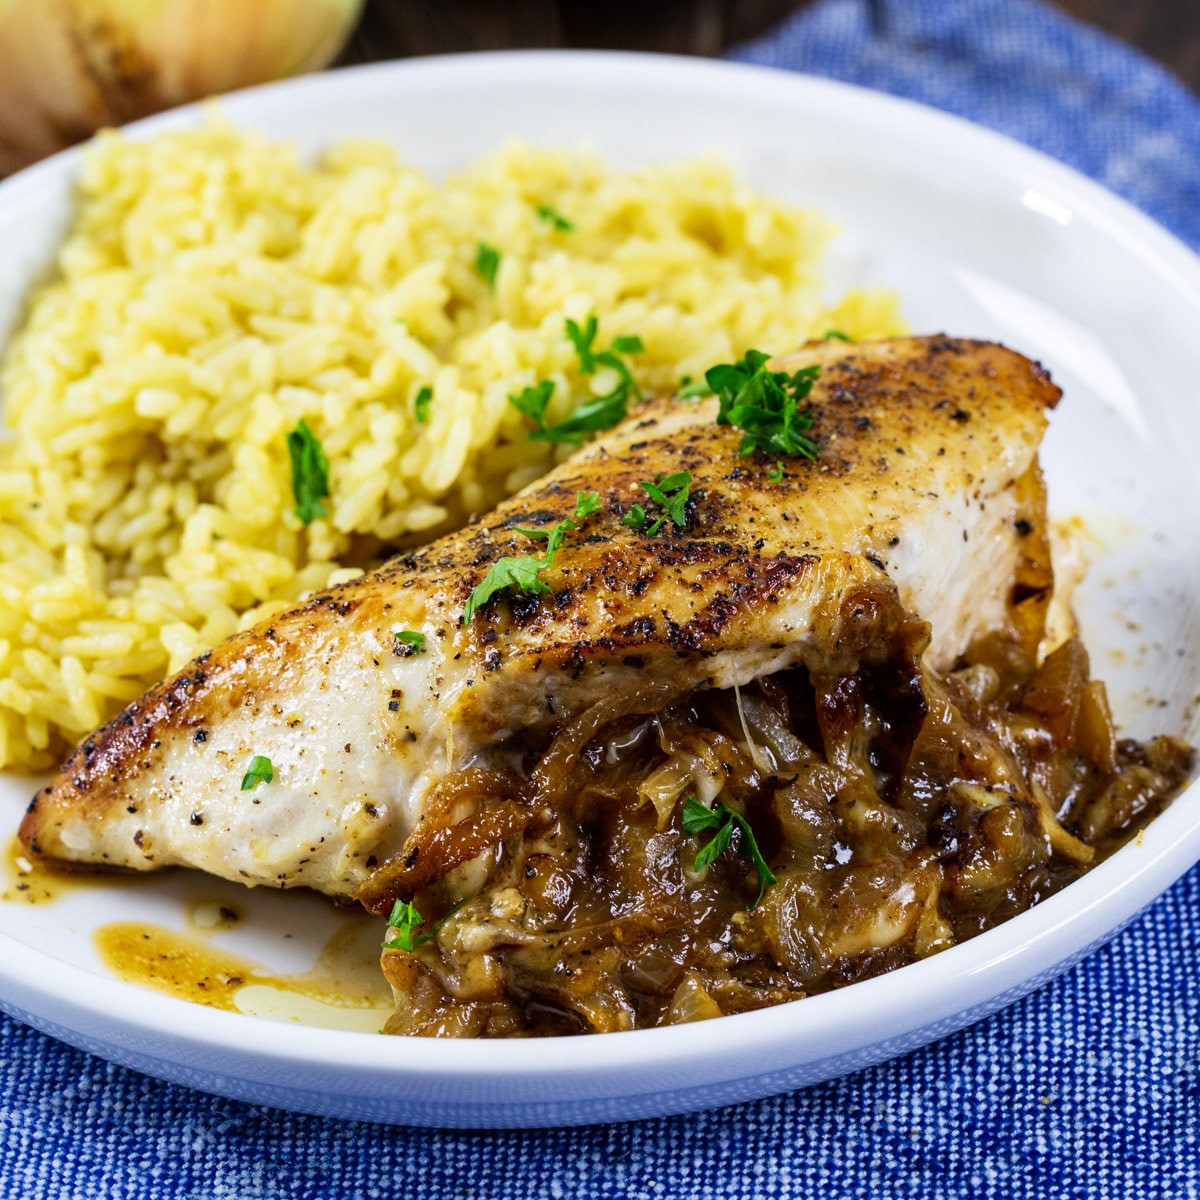 Piece of French Onion Stuffed Chicken on plate with rice.